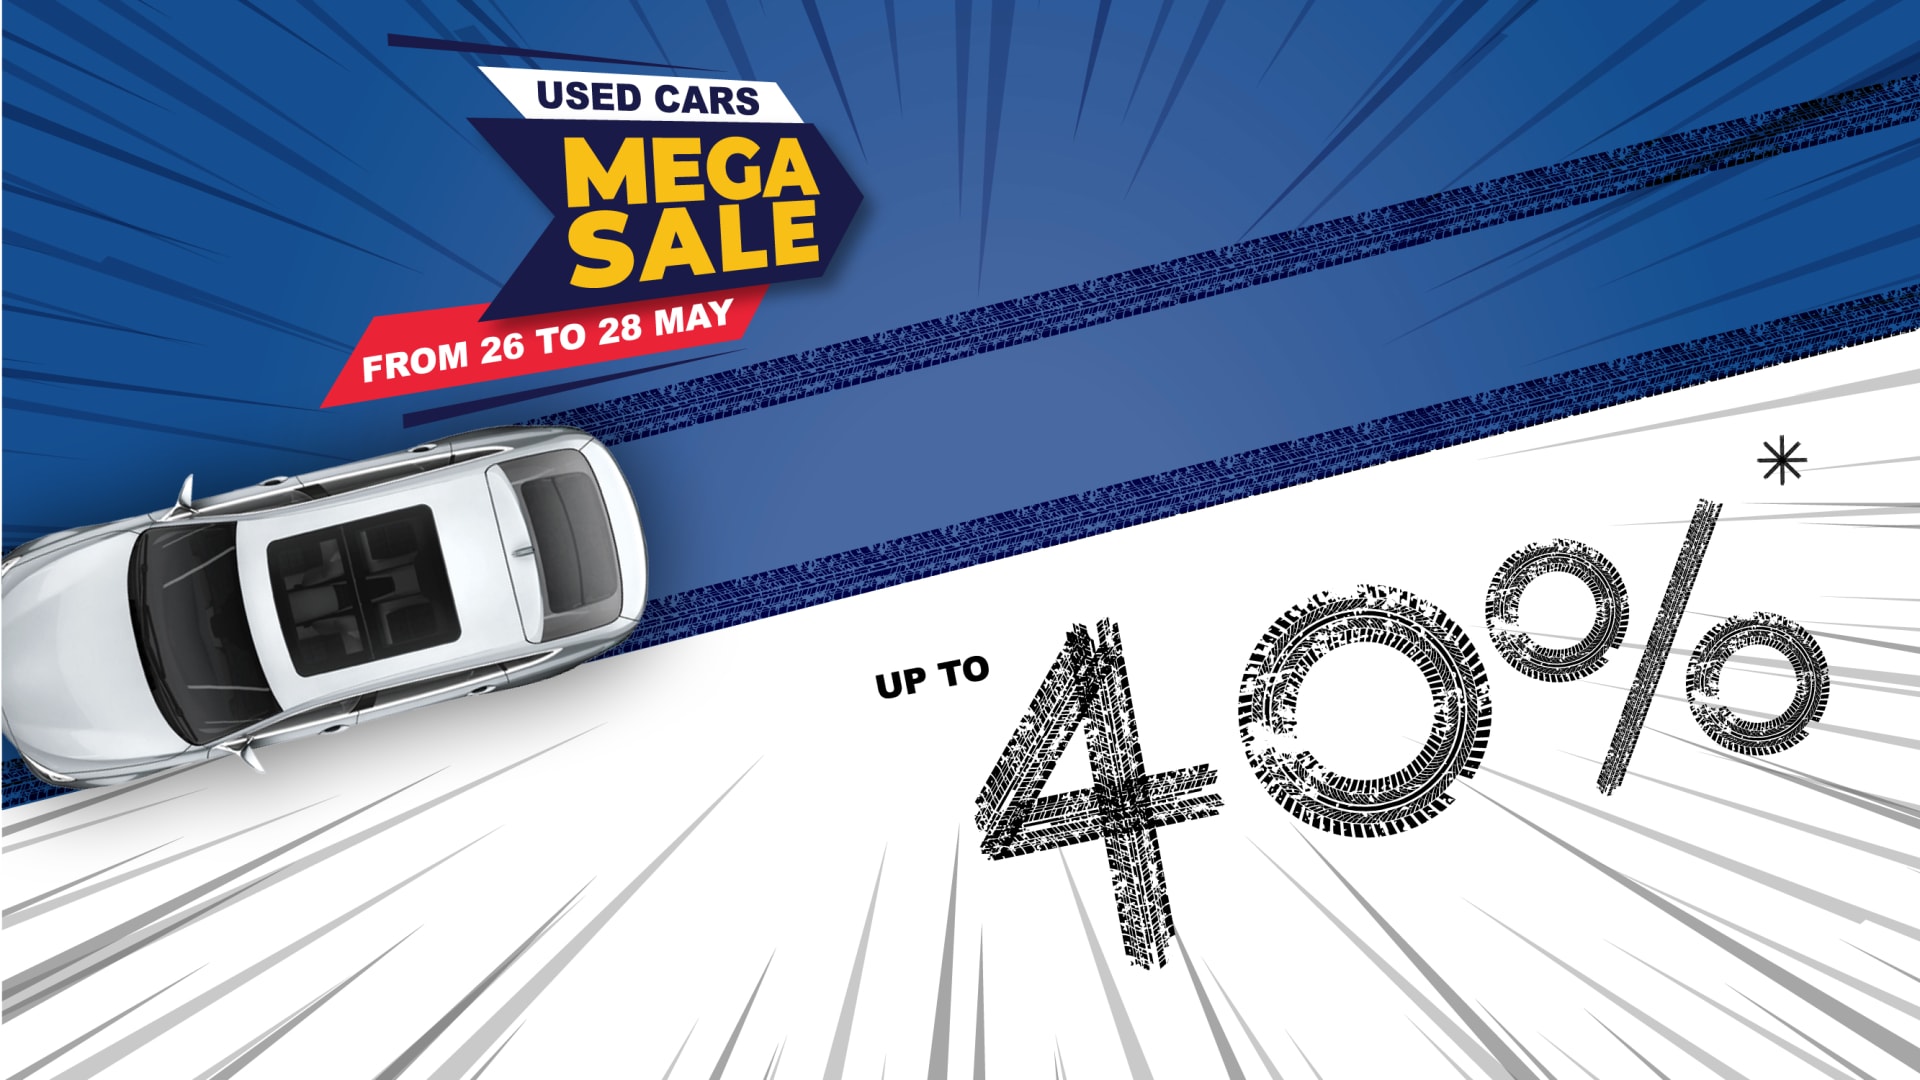 Save up to 40% on your favorite used cars!